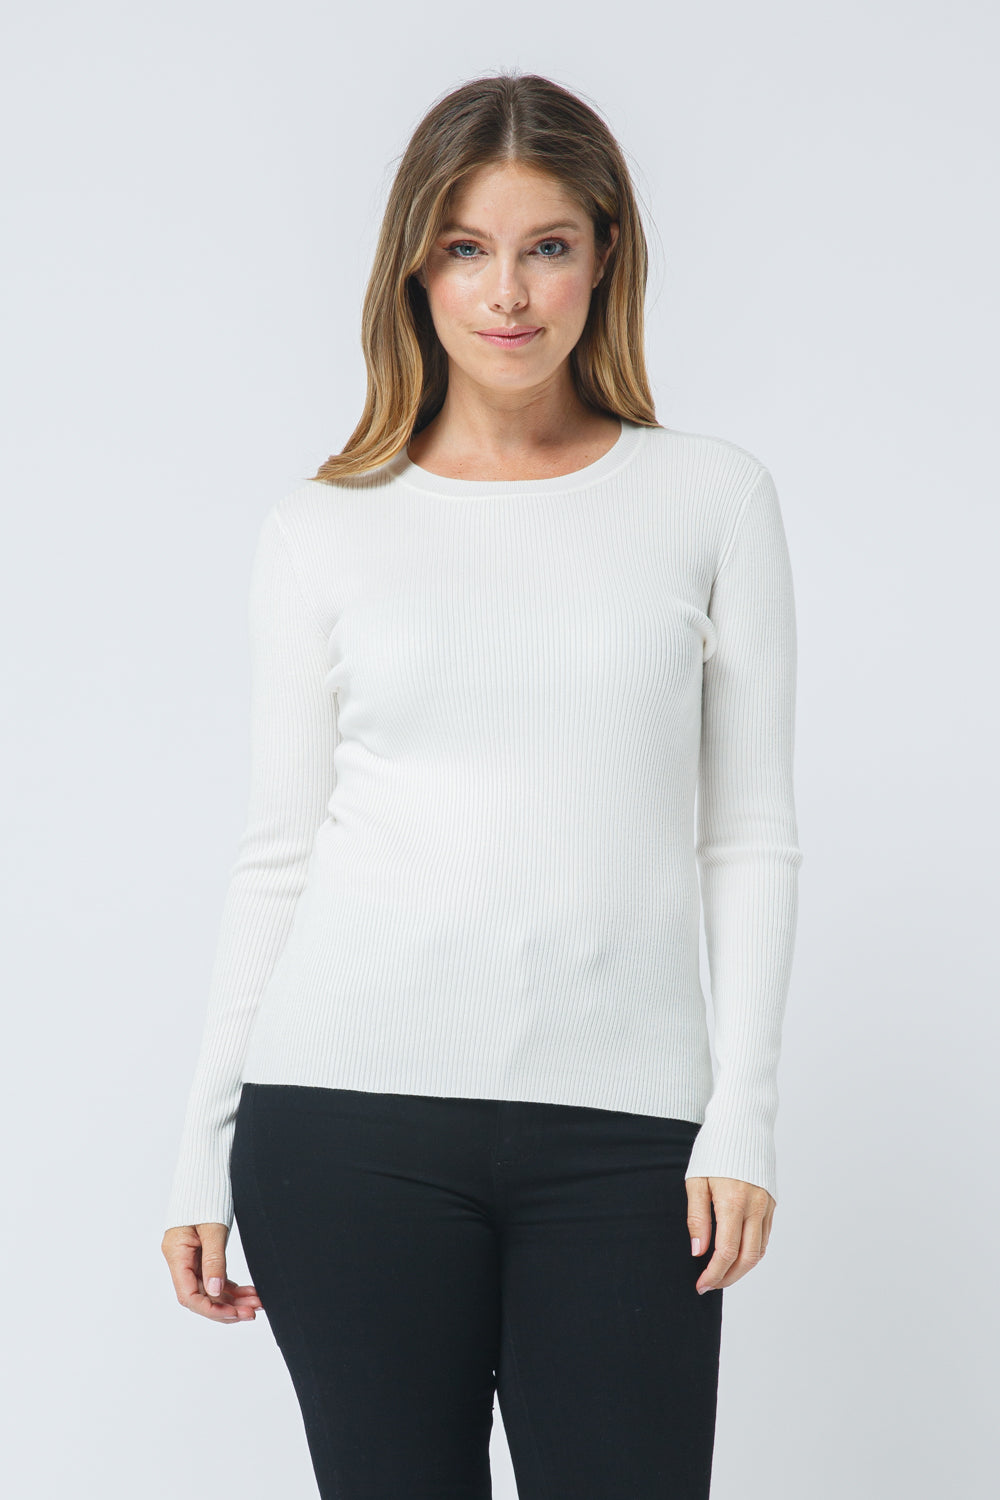 Cielo Women's Ribbed Crew Neck Pullover SW30